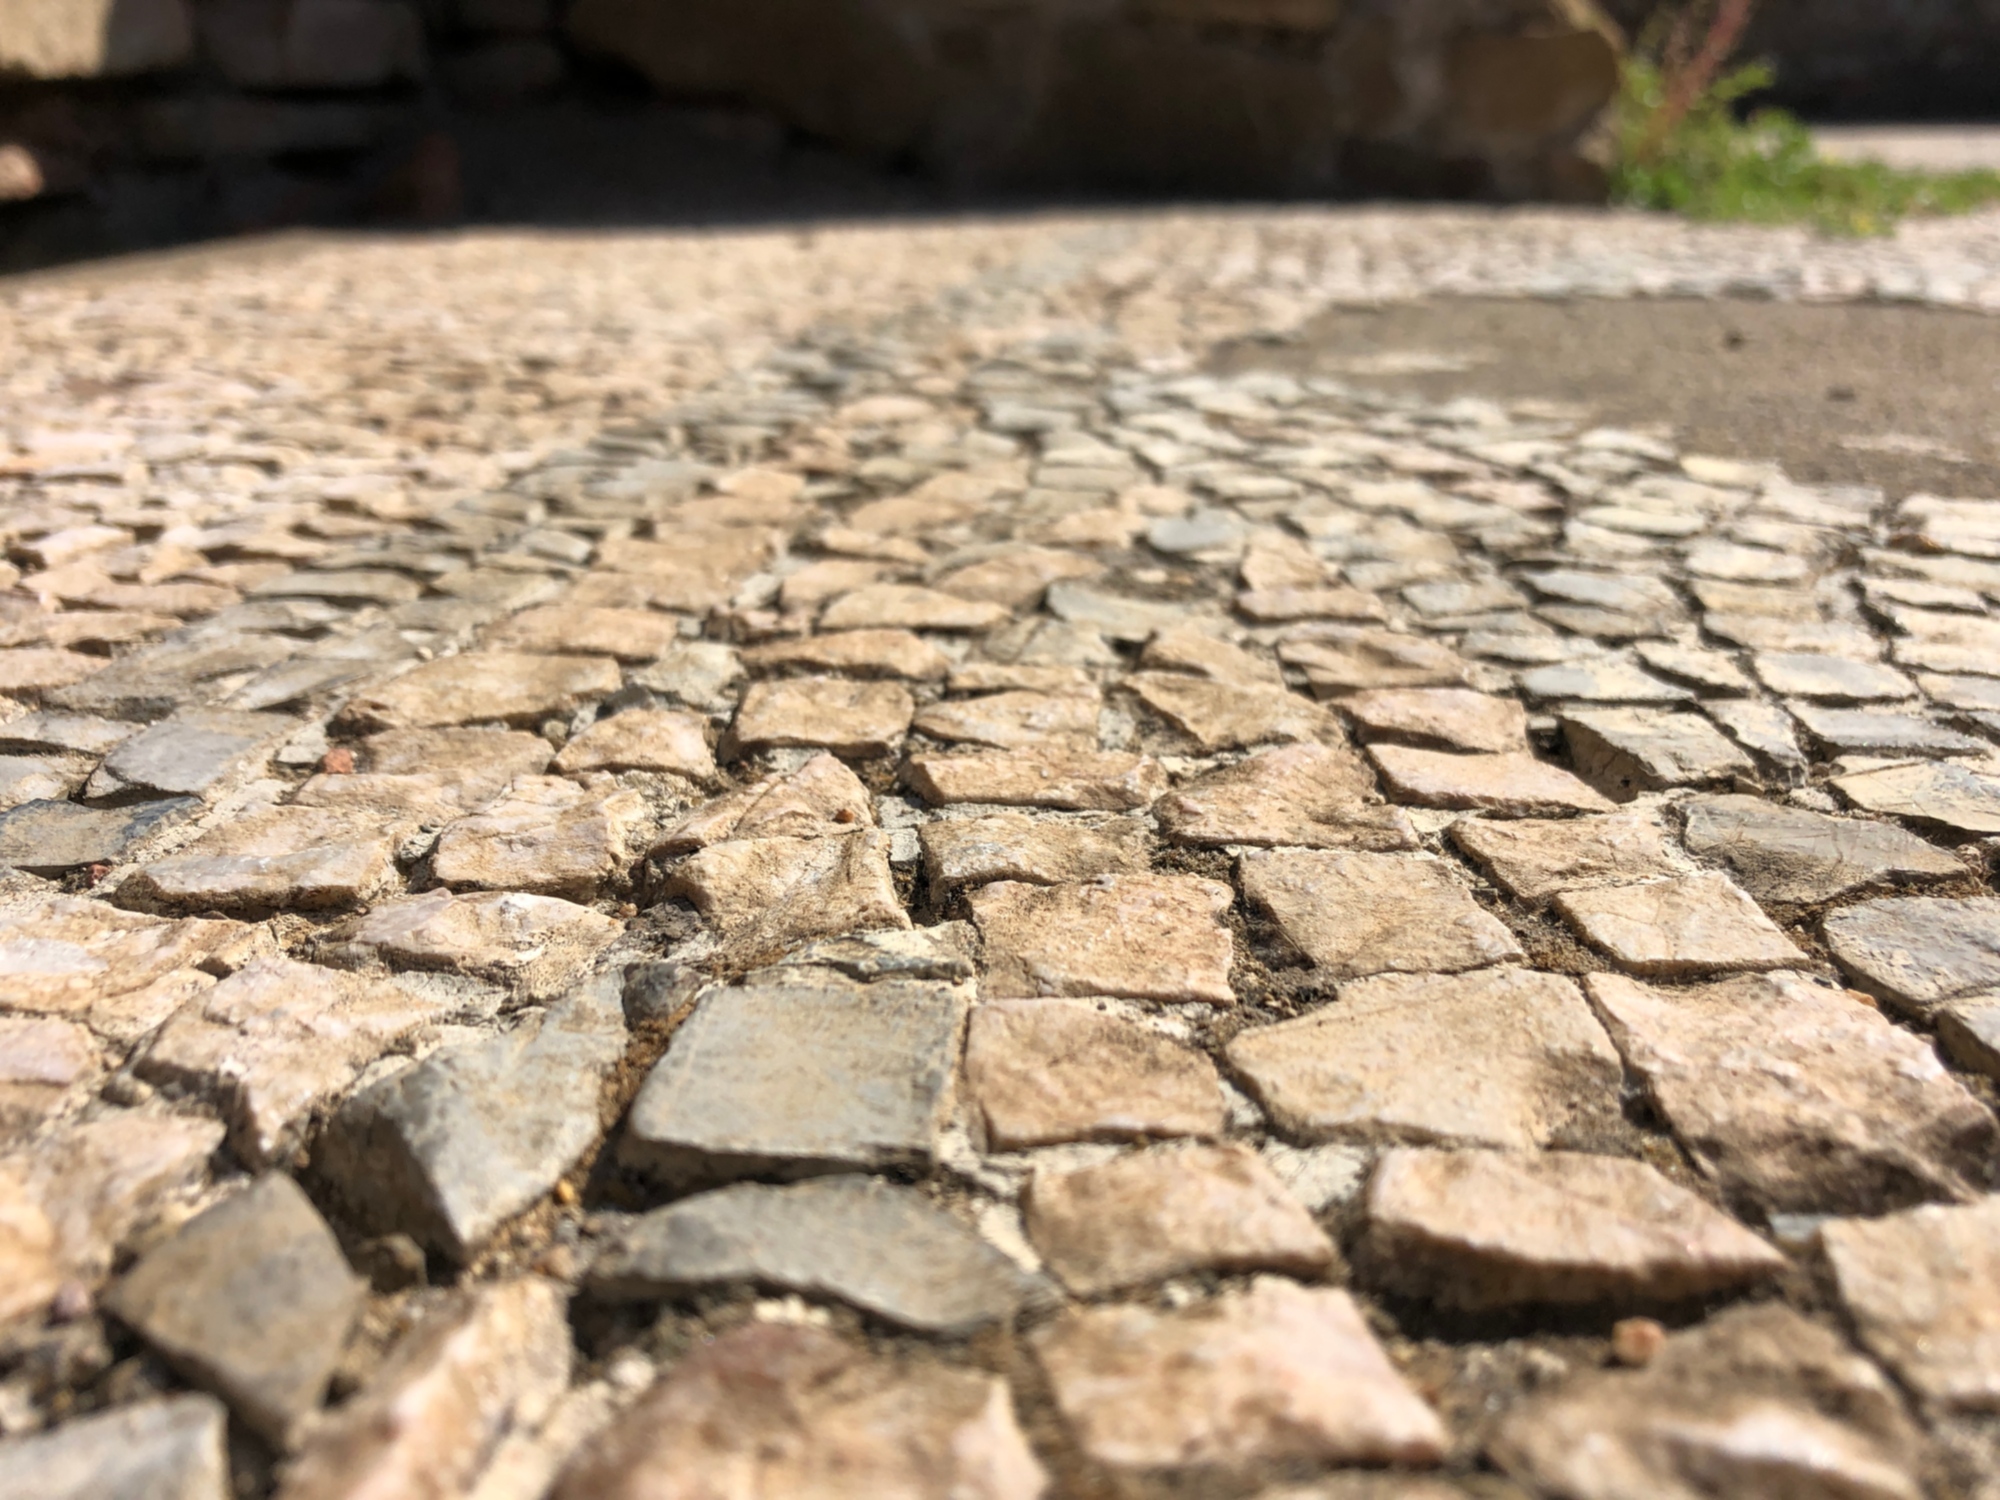 Paving stones at Roselle